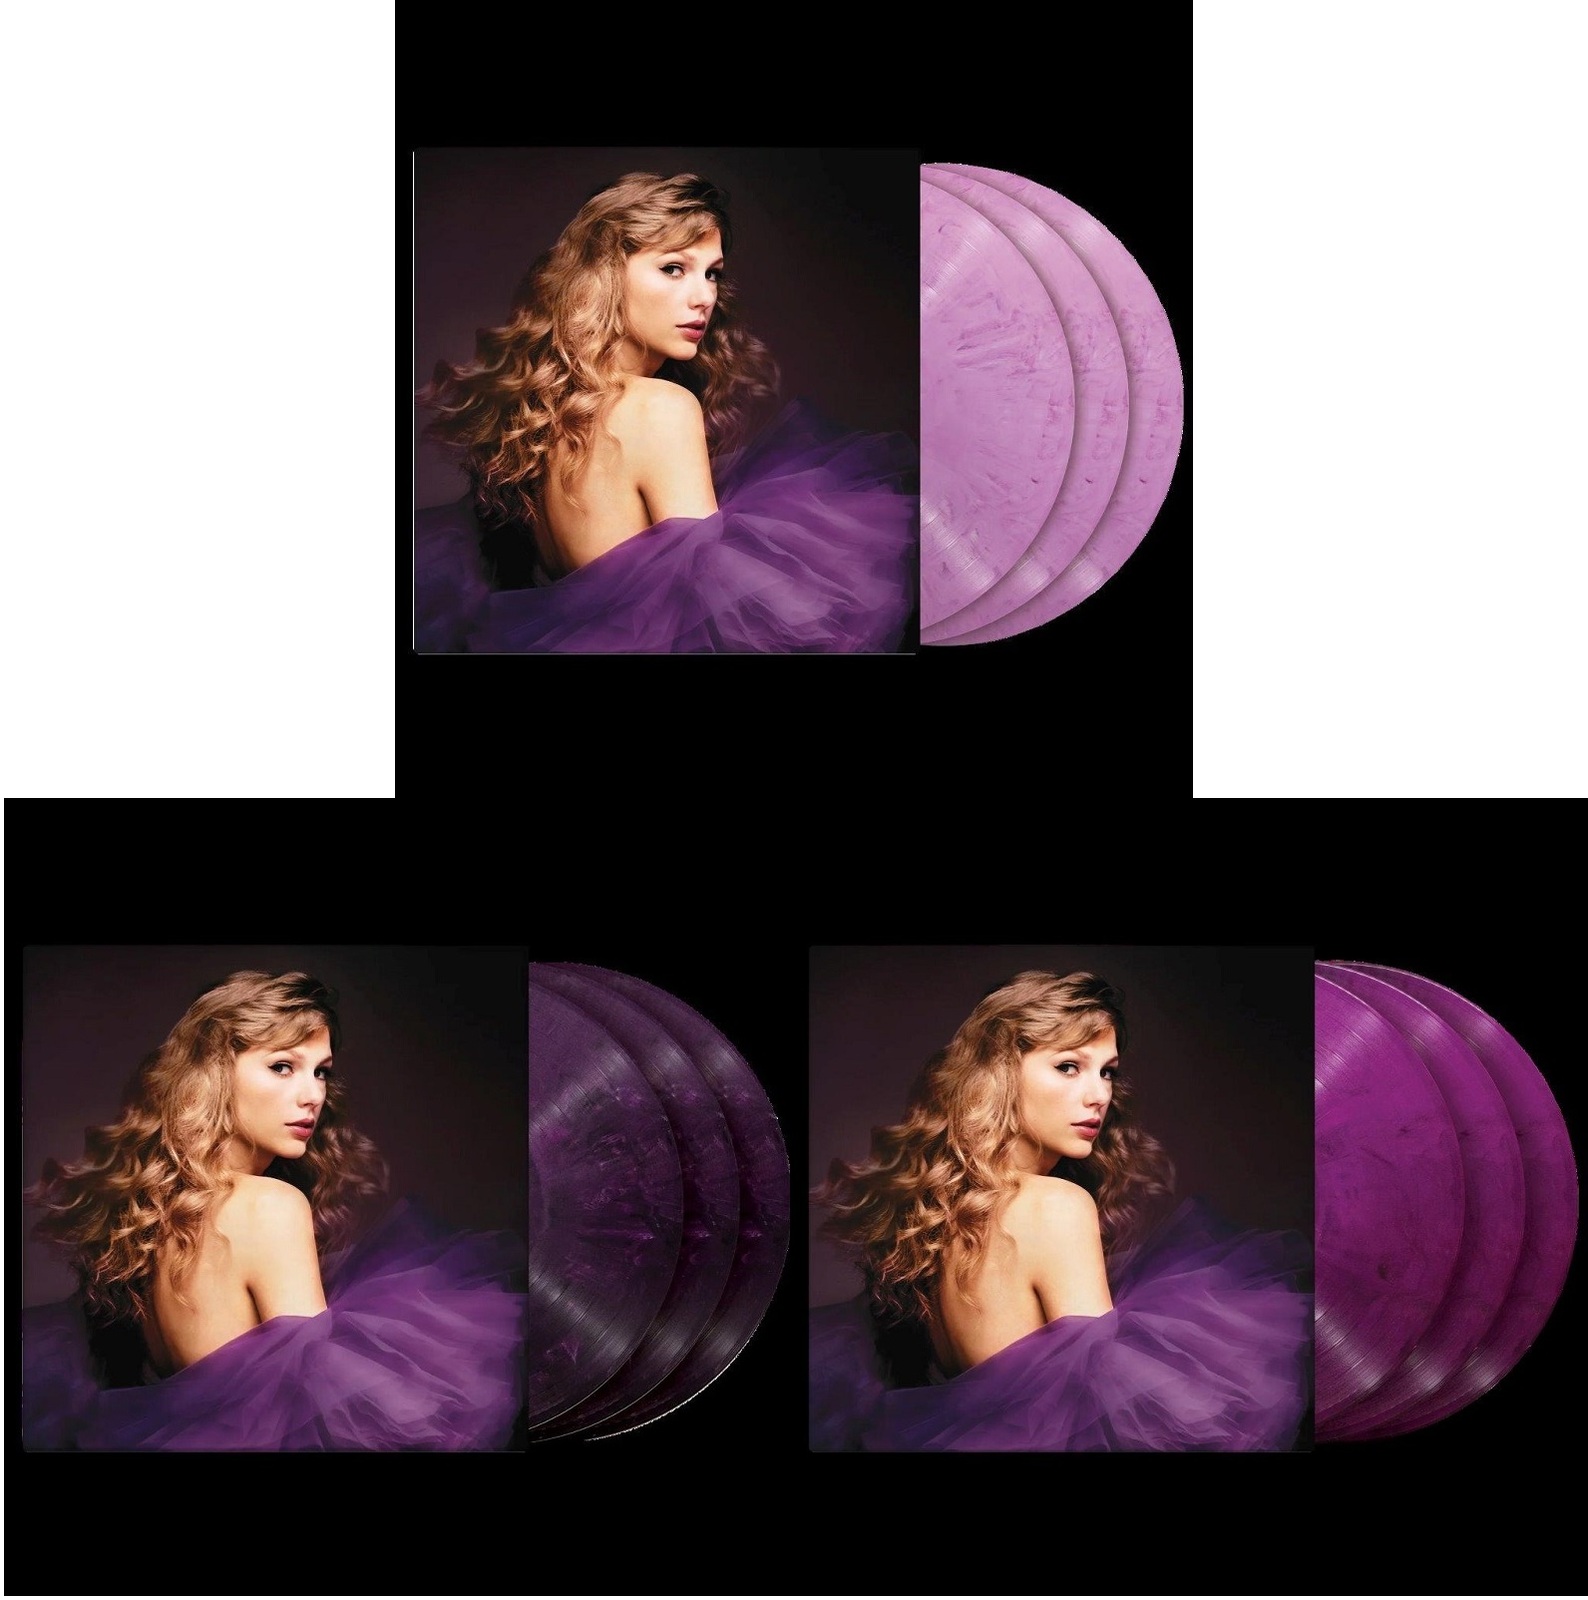 Speak Now (Taylor's Version) Playing Cards – Taylor Swift Official Store